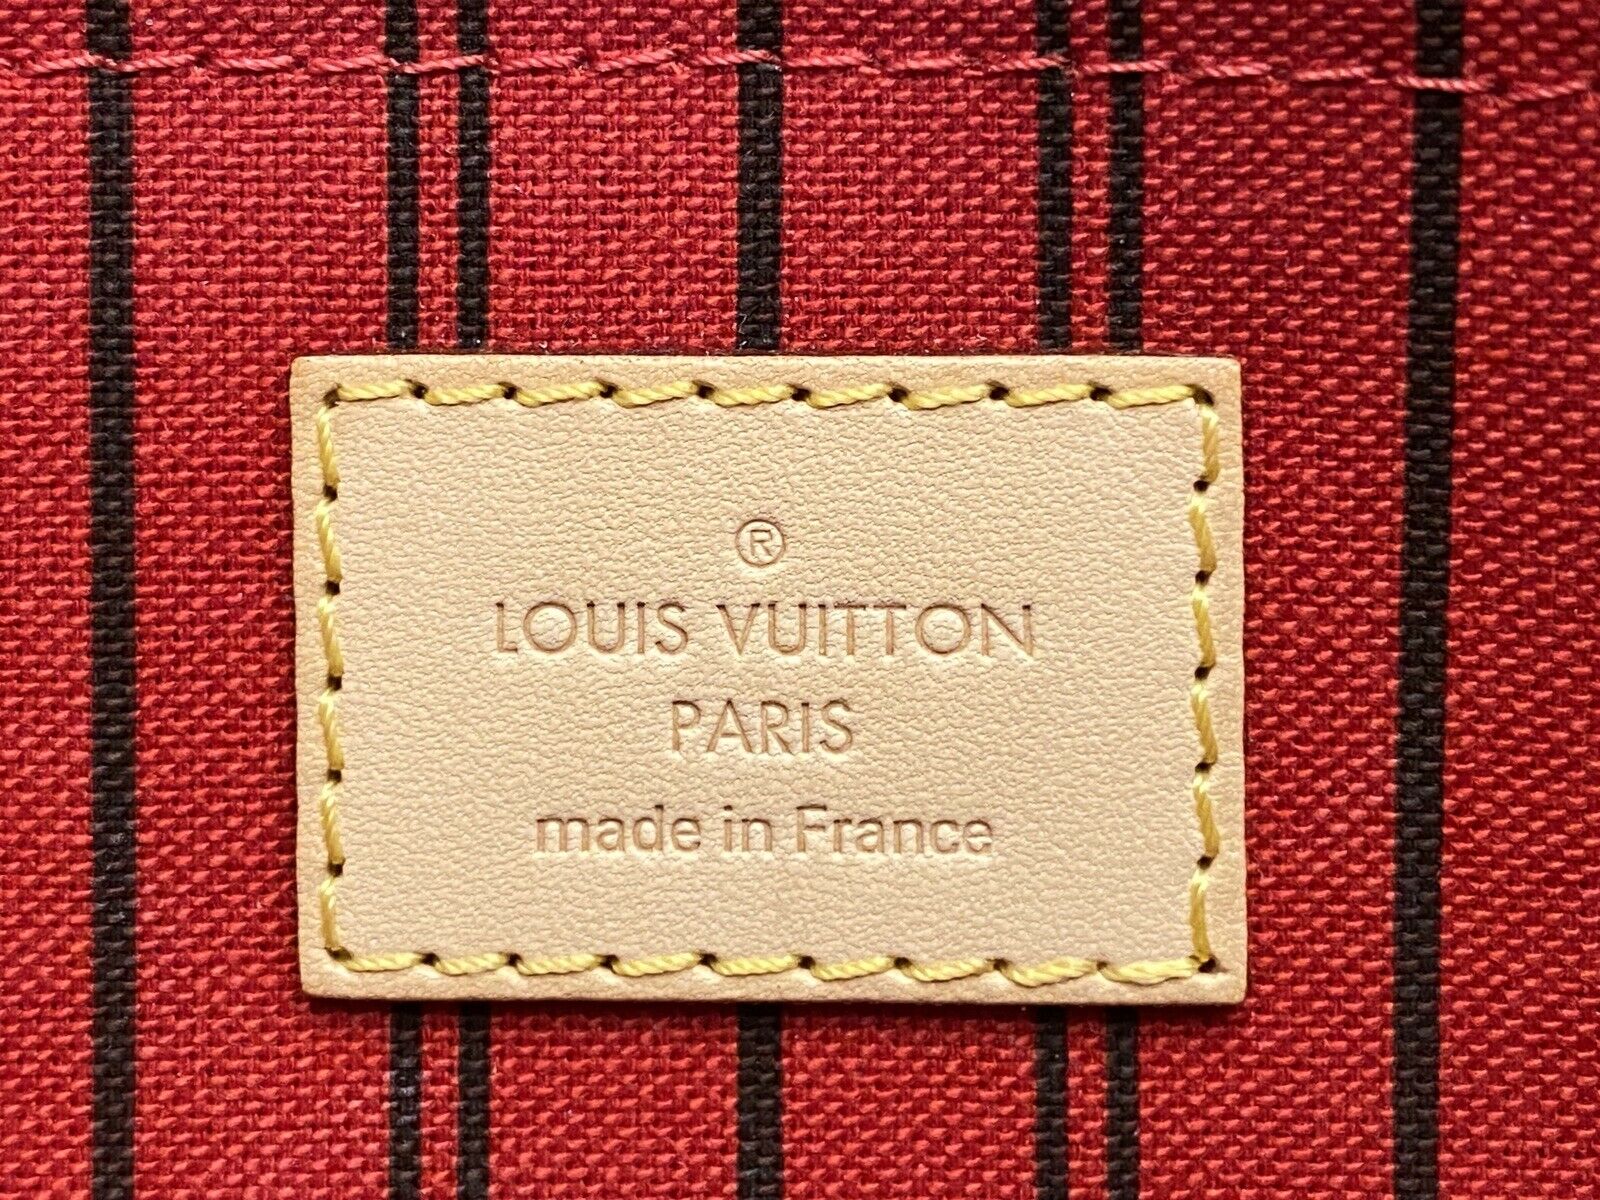 Louis Vuitton Date Code Ar2189 - For Sale on 1stDibs  lv ar2189, ar2189  louis vuitton, louis vuitton ar2189